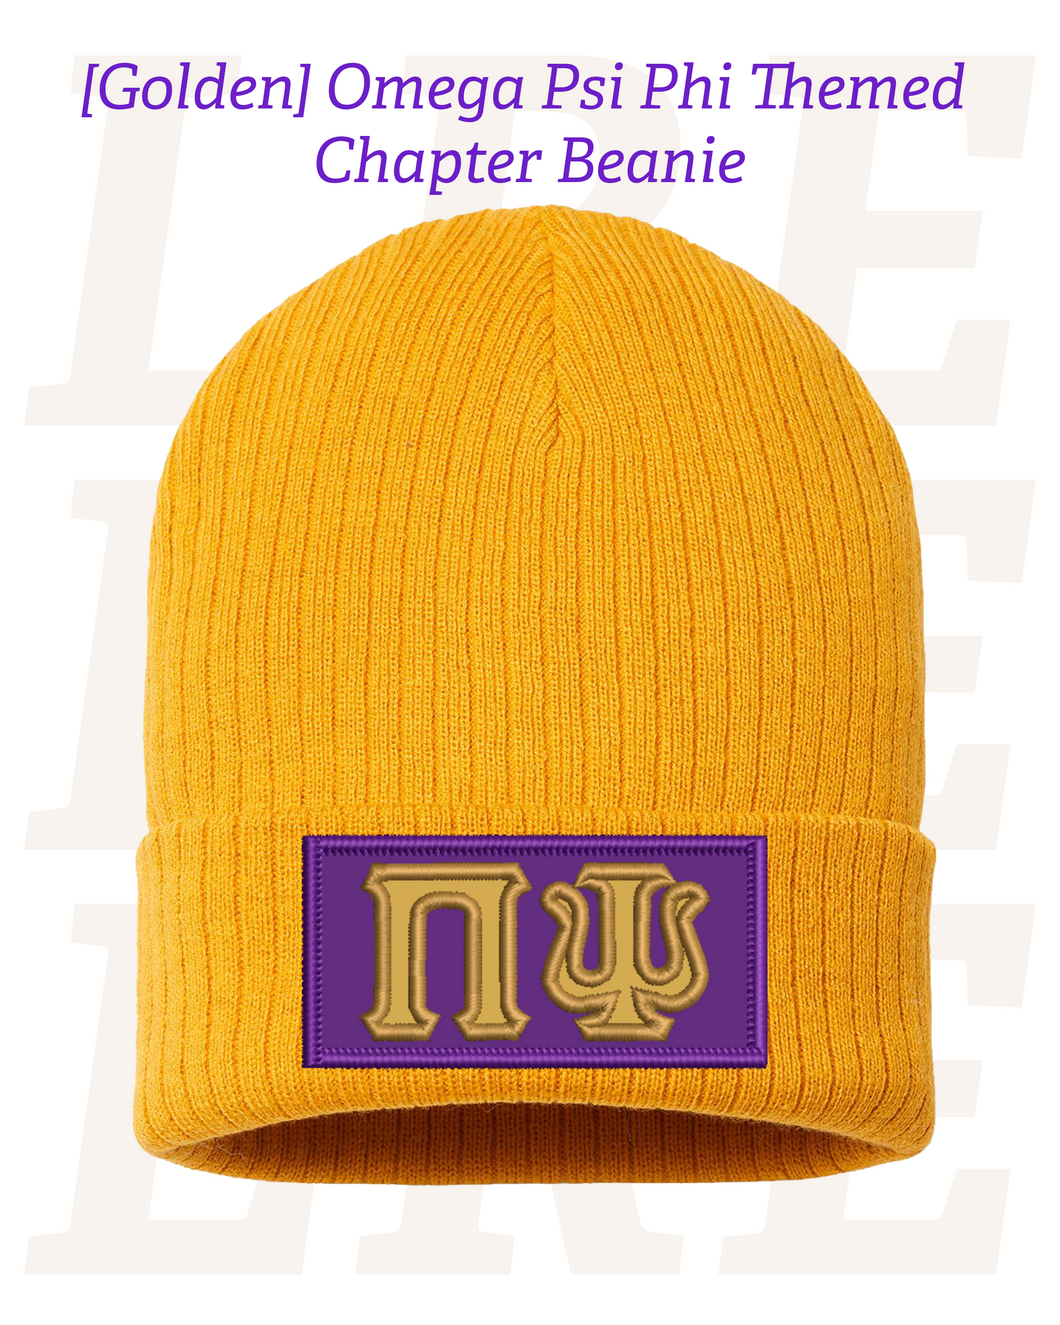 [Golden] Embroidered Omega Psi Phi Themed Chapter Beanie